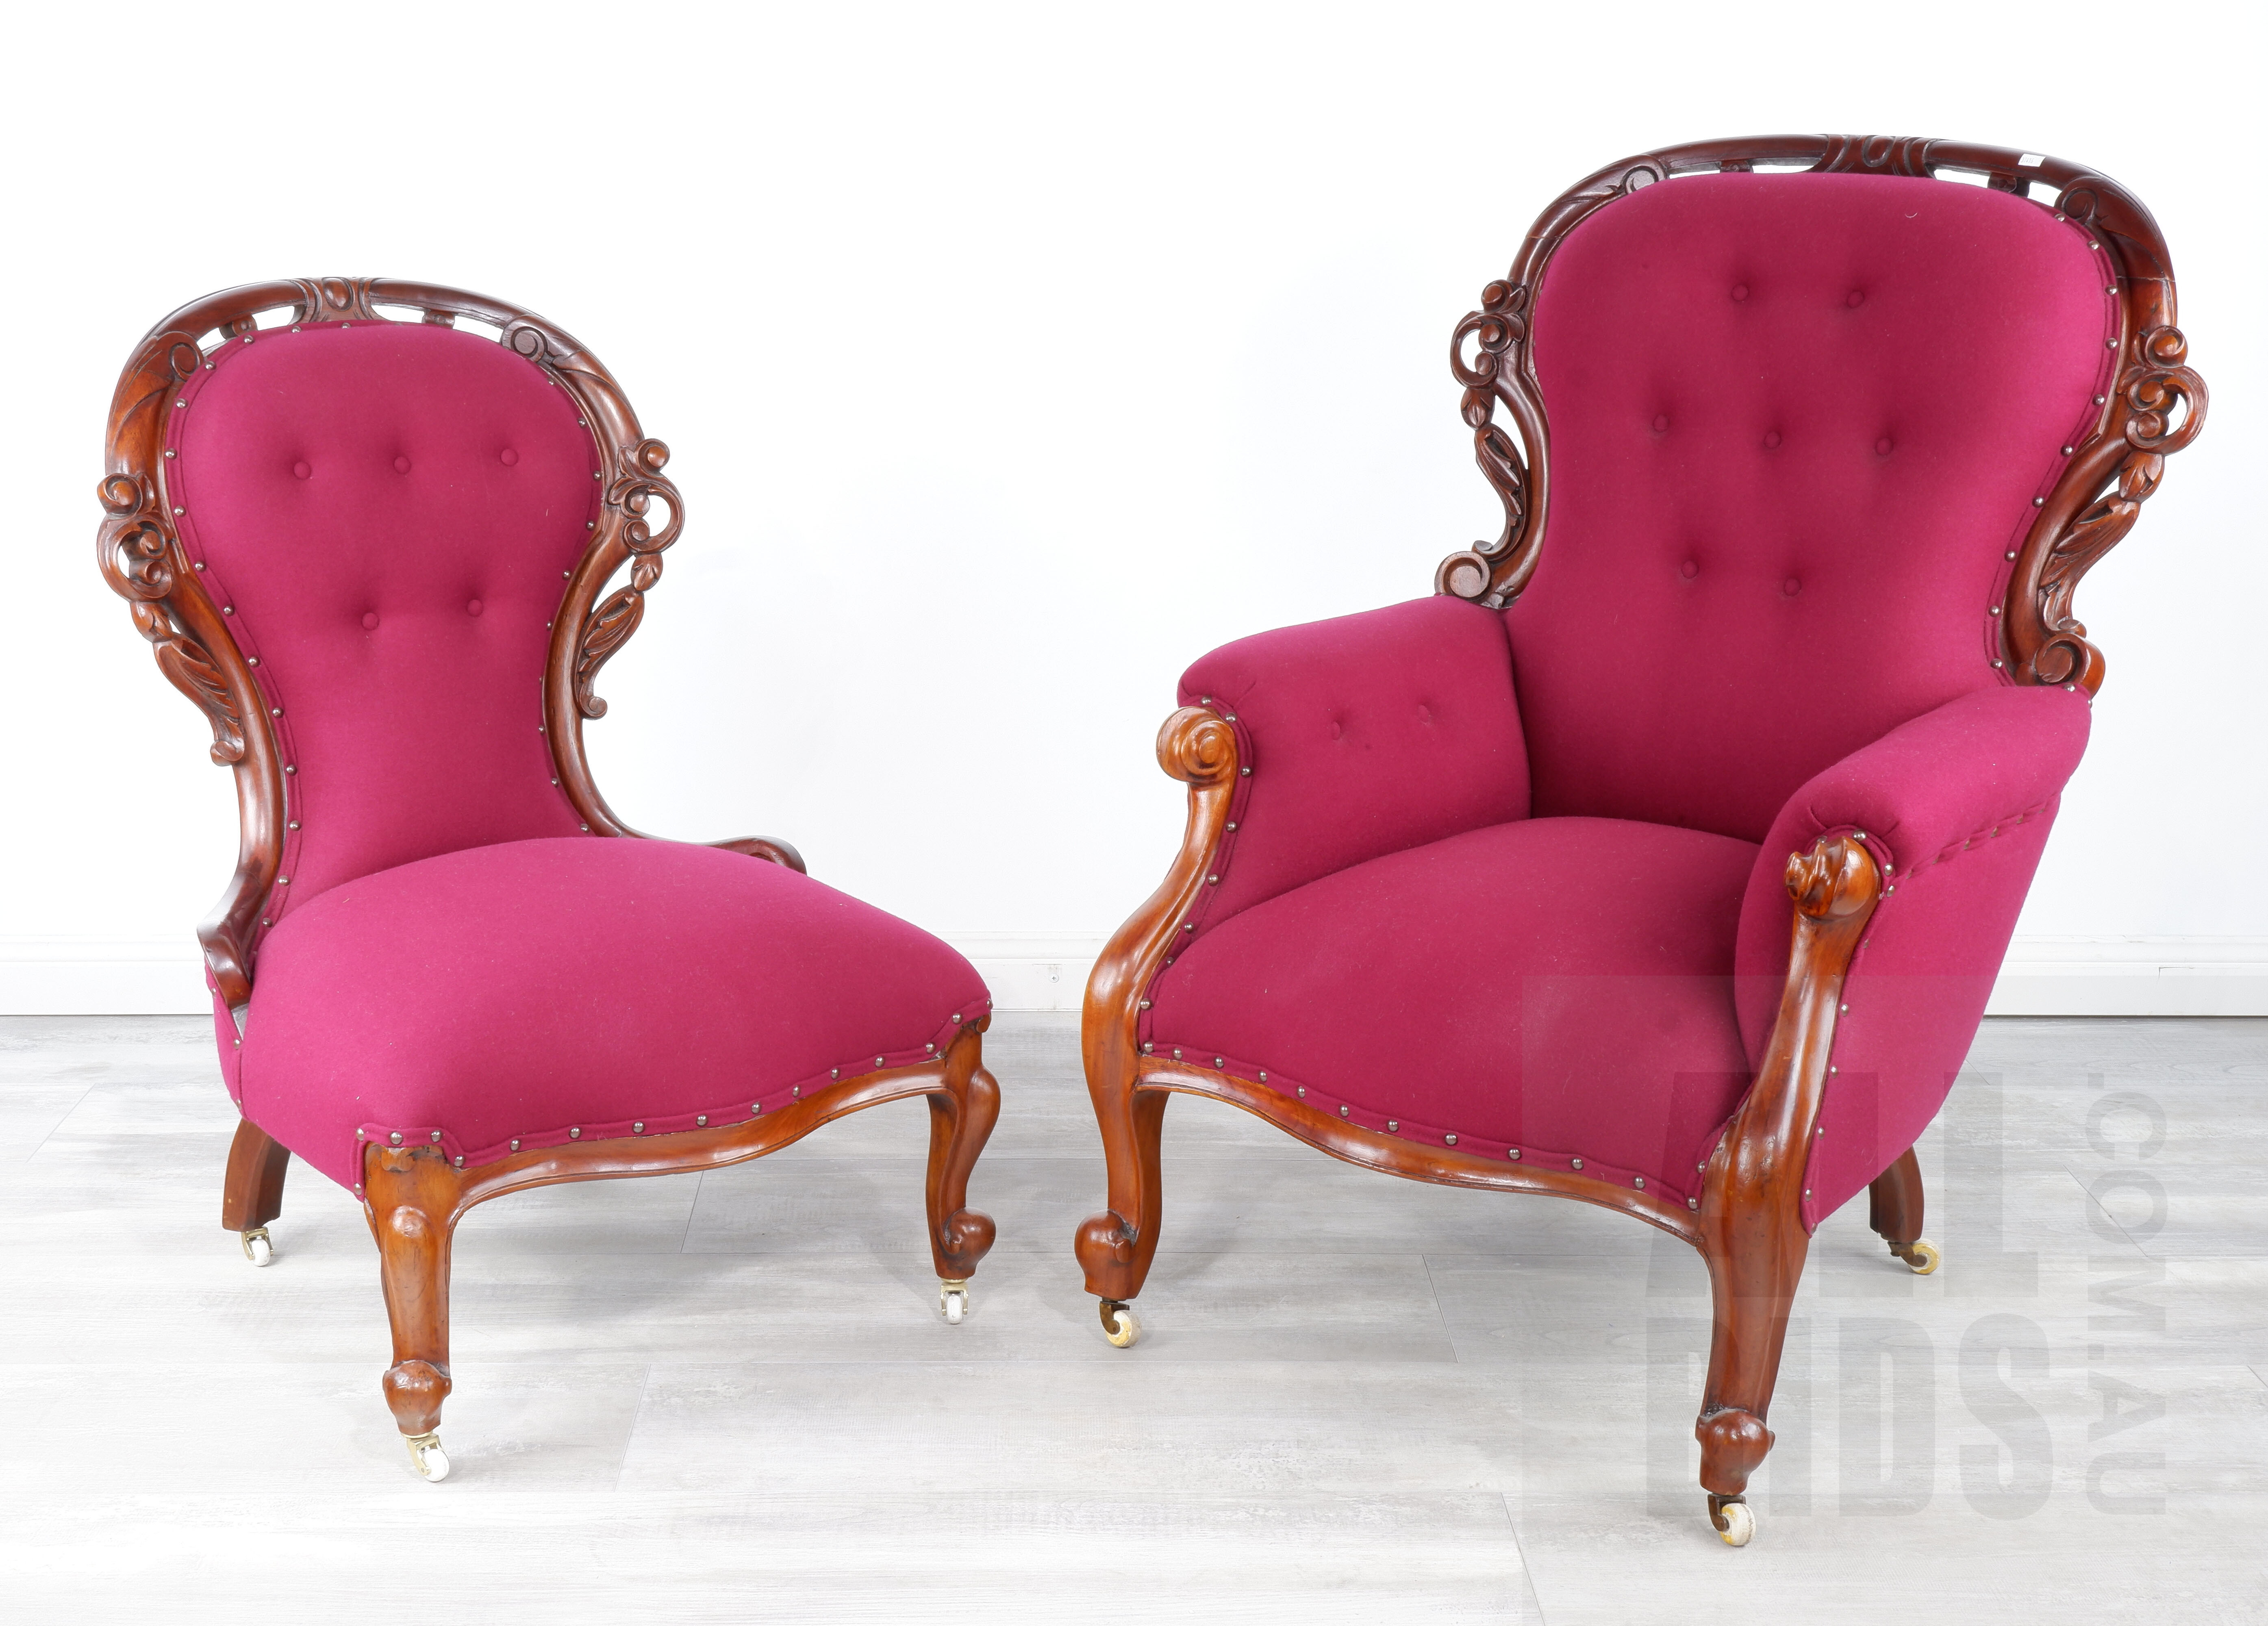 'Good Victorian Mahogany Armchair with Matched Salon Chair, Both with Vibrant Crimson Fabric Upholstery, Circa 1880'